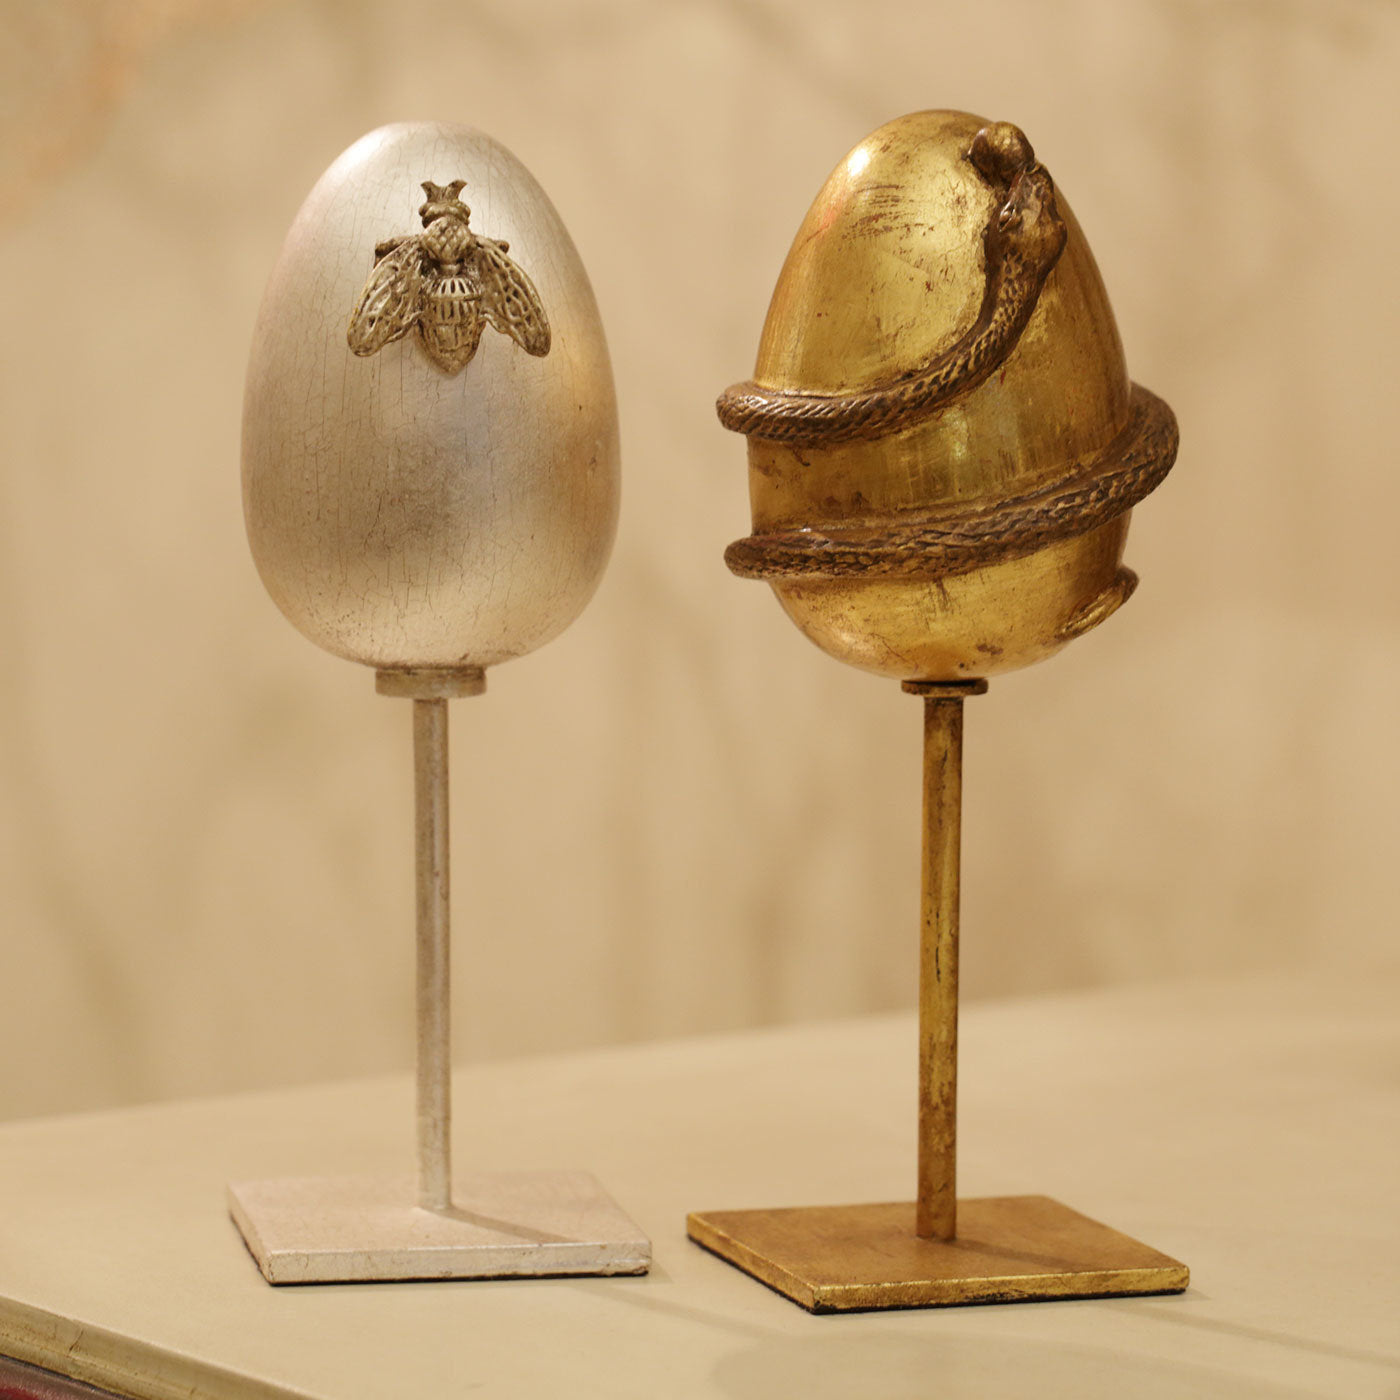 Partenope Egg N°5 Gold Small Sculpture - Alternative view 2